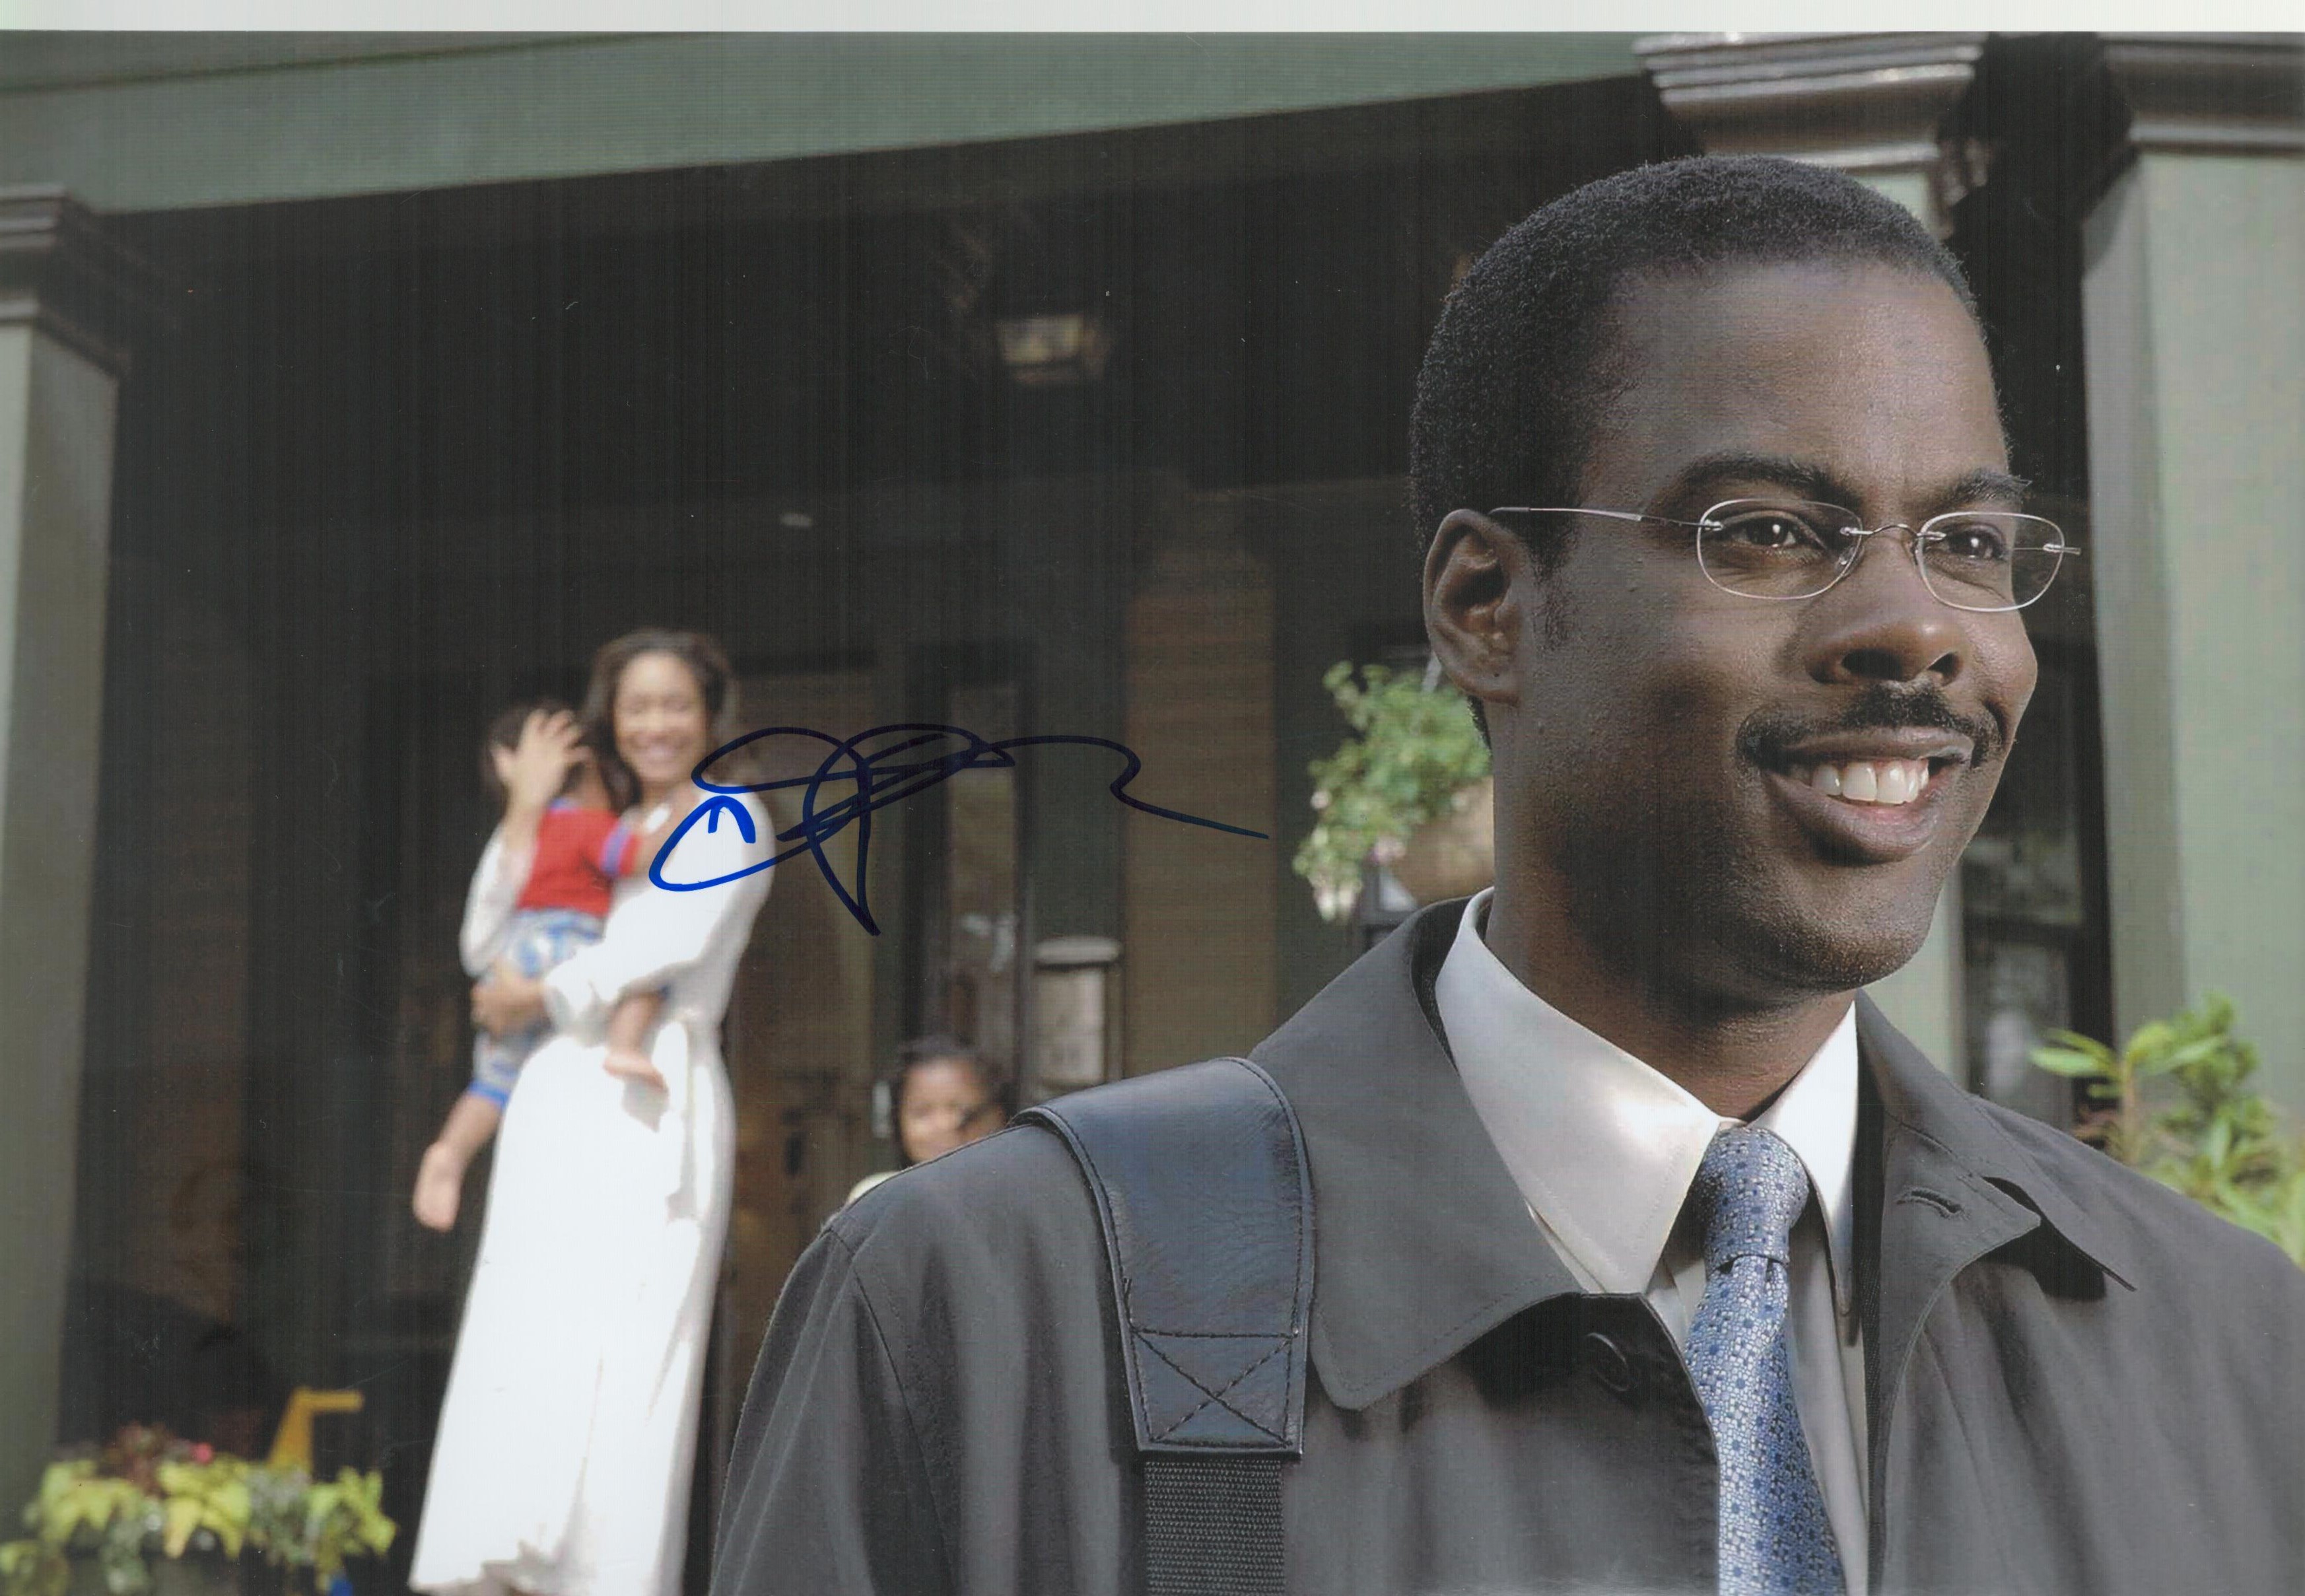 Chris Rock signed 12x8 colour photo. Good condition. All autographs come with a Certificate of